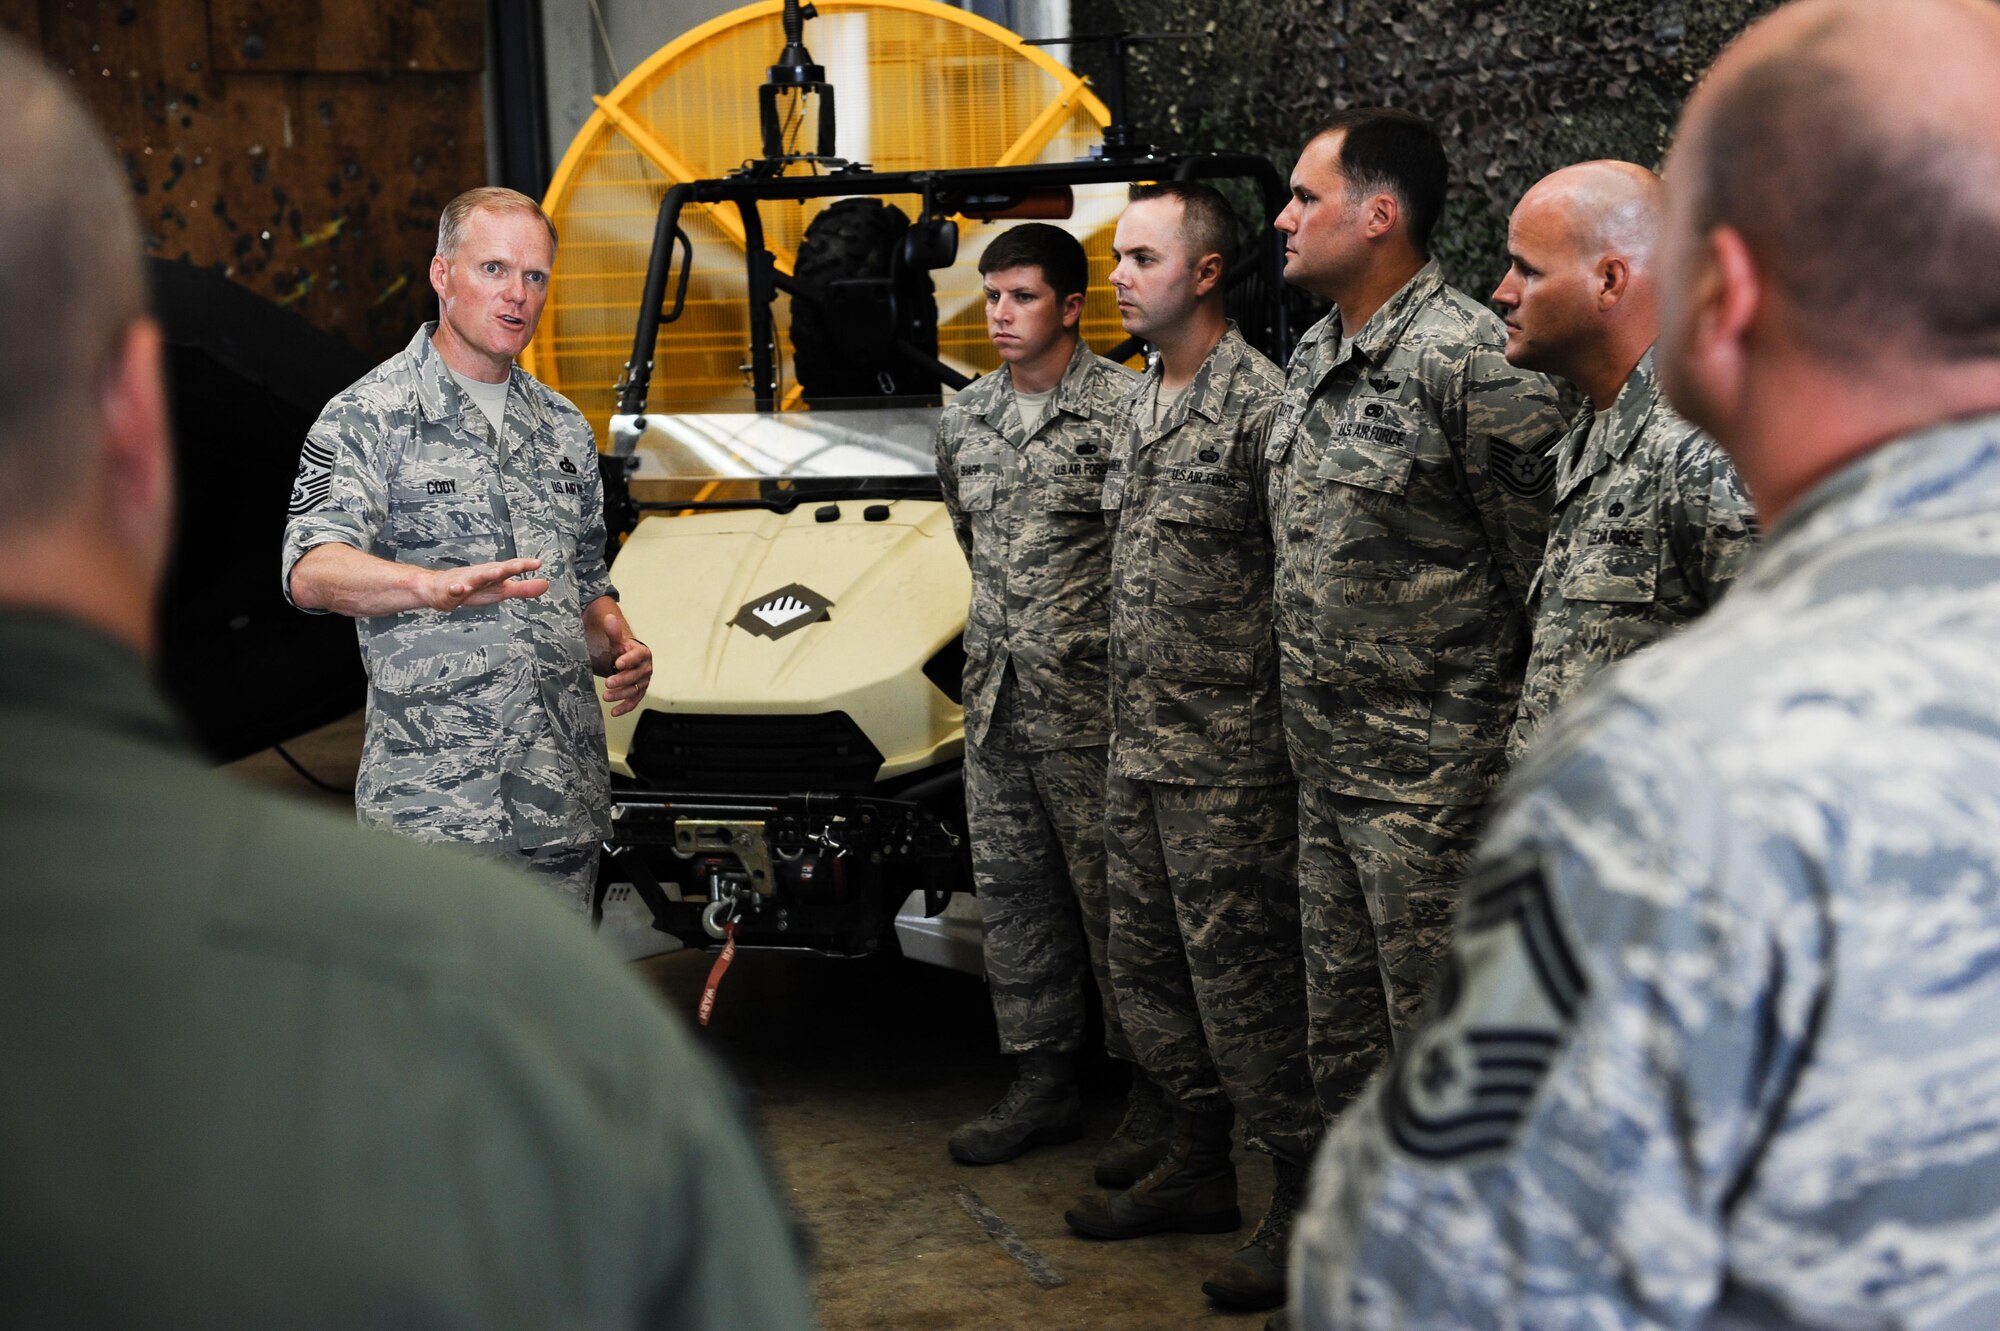 Chief Master Sgt. of the Air Force James Cody speaks to members of the 18th Communications Squadron, July 8, 2015, on Kadena Air Base, Japan. As part of his ongoing initiative to engage enlisted Airmen stationed around the globe, the chief will be continuing his tour through the Pacific Air Forces once he leaves Kadena. (U.S. Air Force photo by Airman 1st Class John Linzmeier/Released)